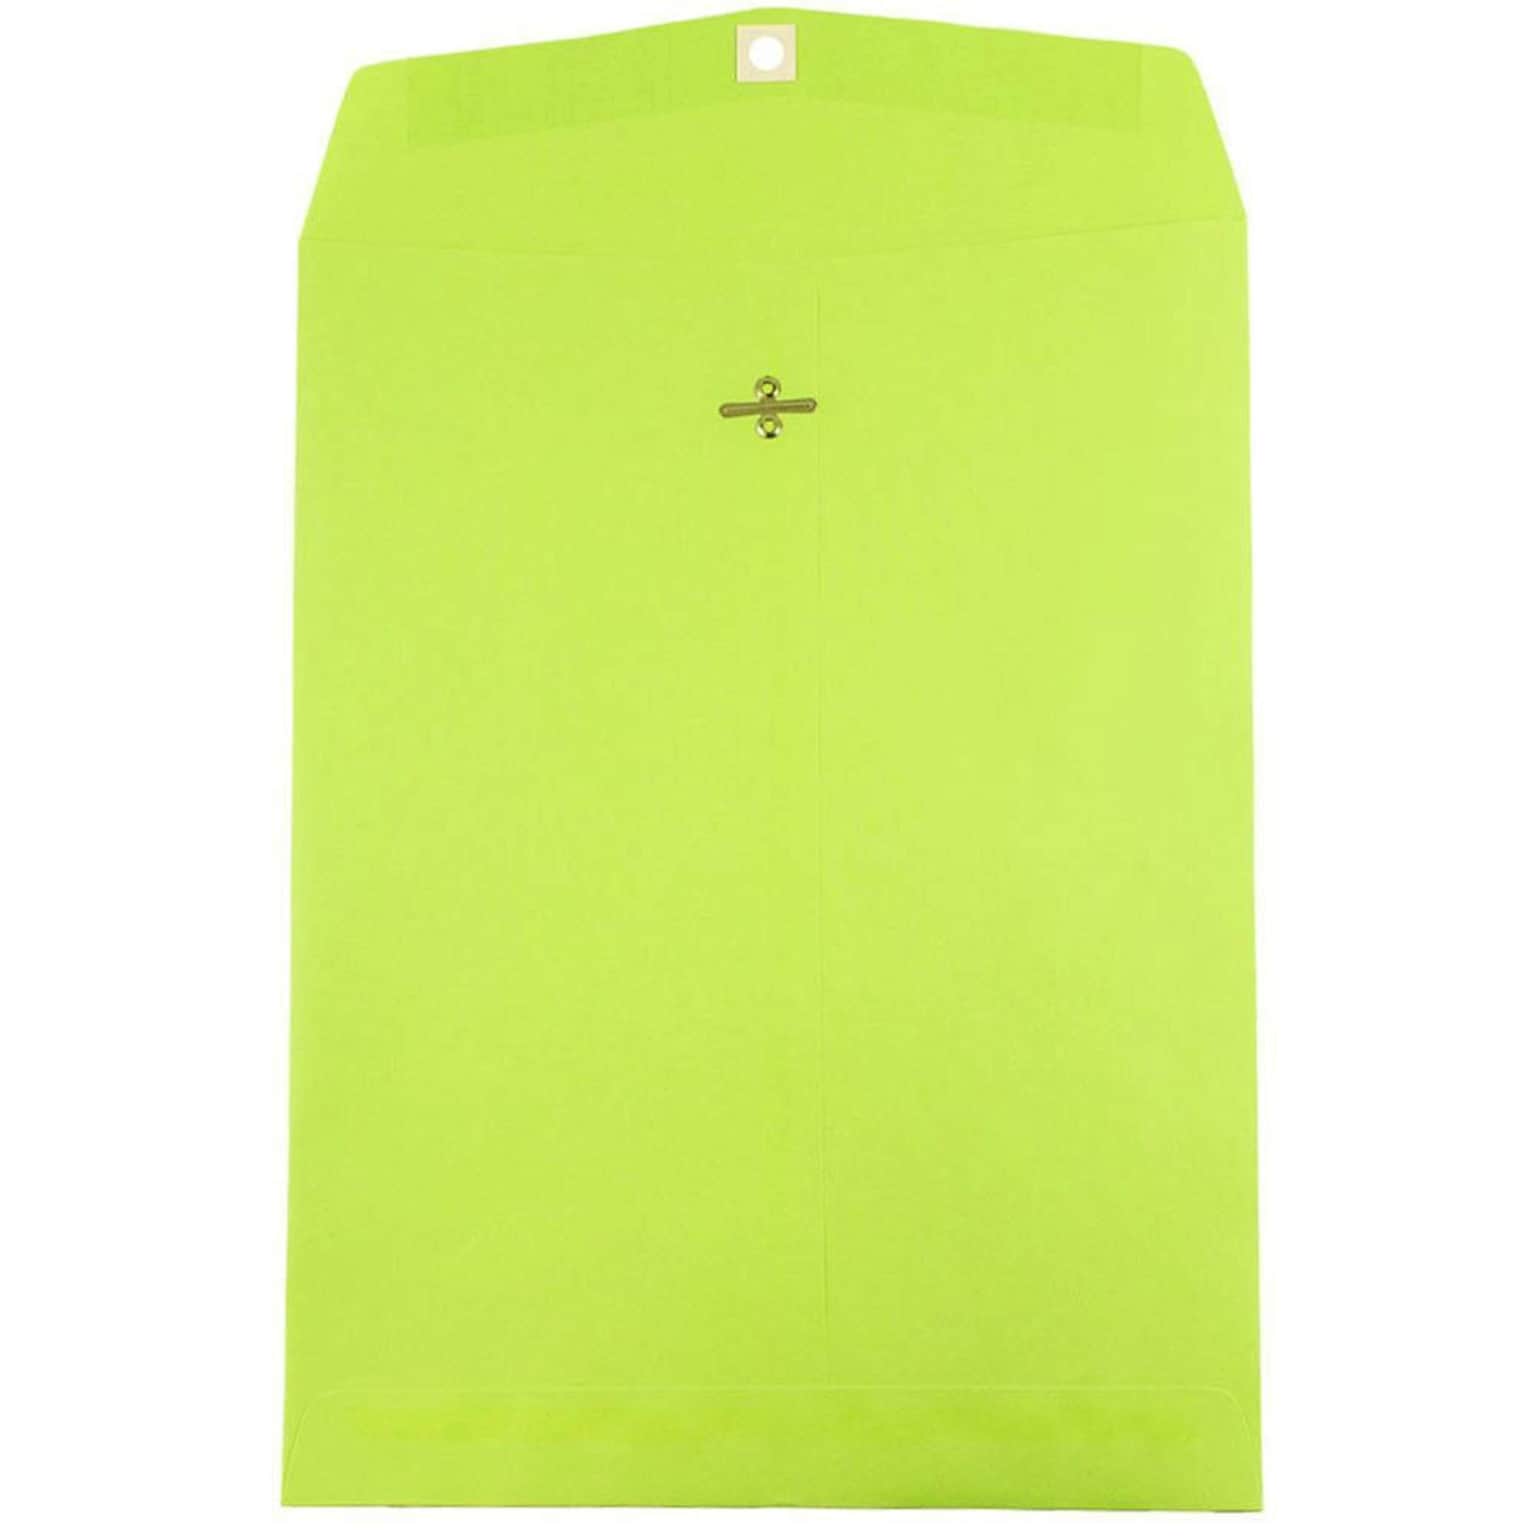 JAM Paper® 10 x 13 Open End Catalog Colored Envelopes with Clasp Closure, Ultra Lime Green, 10/Pack (V0128186B)